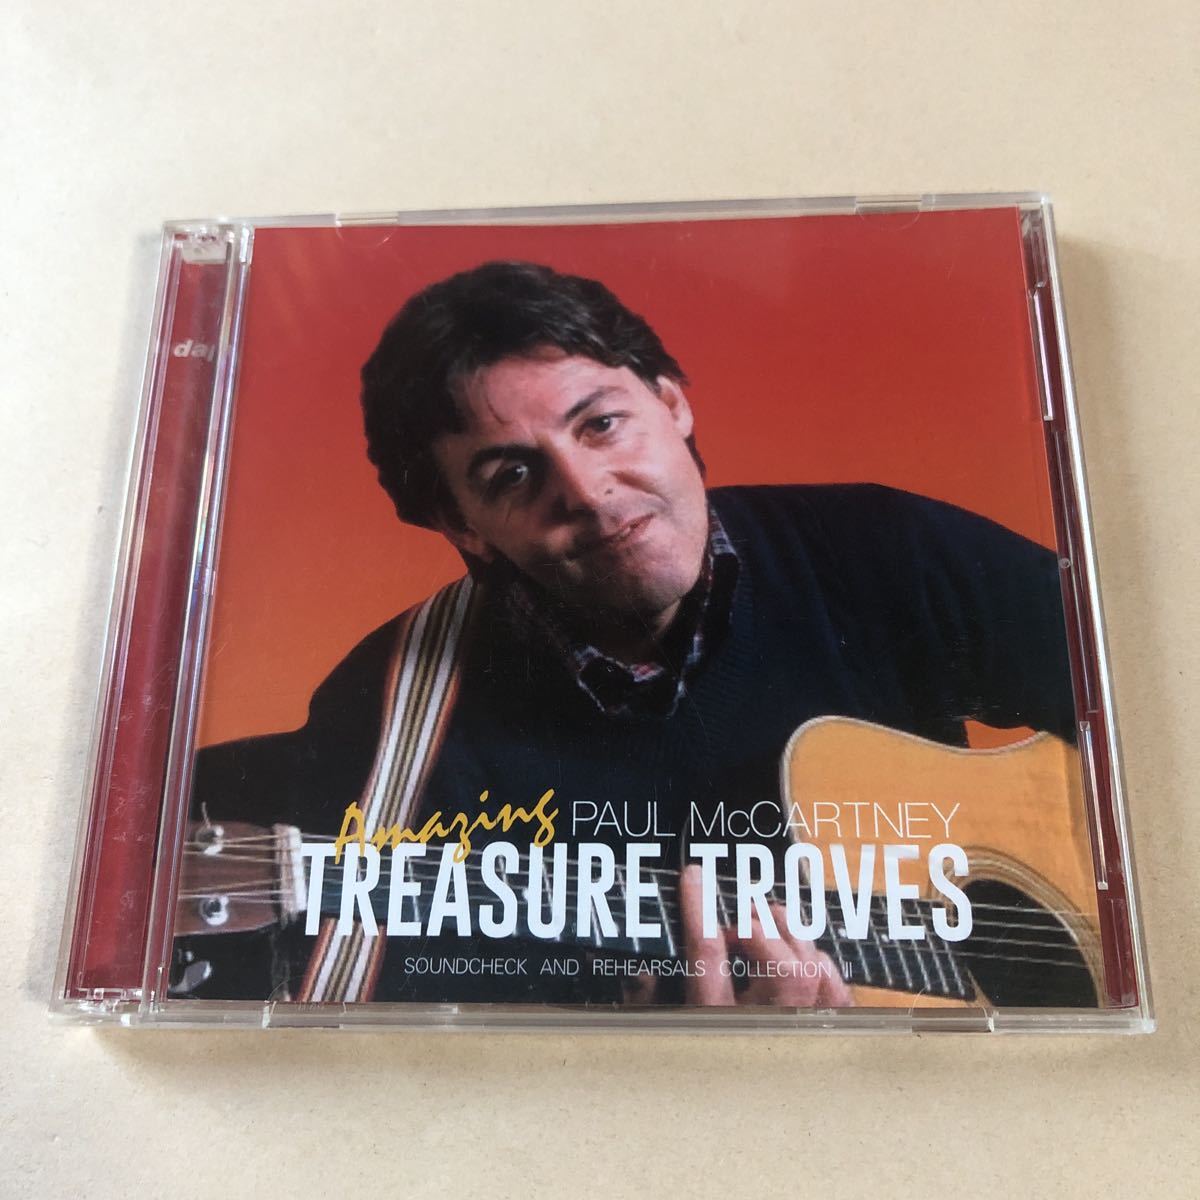 Paul McCartney 2CD「TREASURE TROVES：SOUNDCHEK AND REHEARSALS COLLECTION II」の画像1